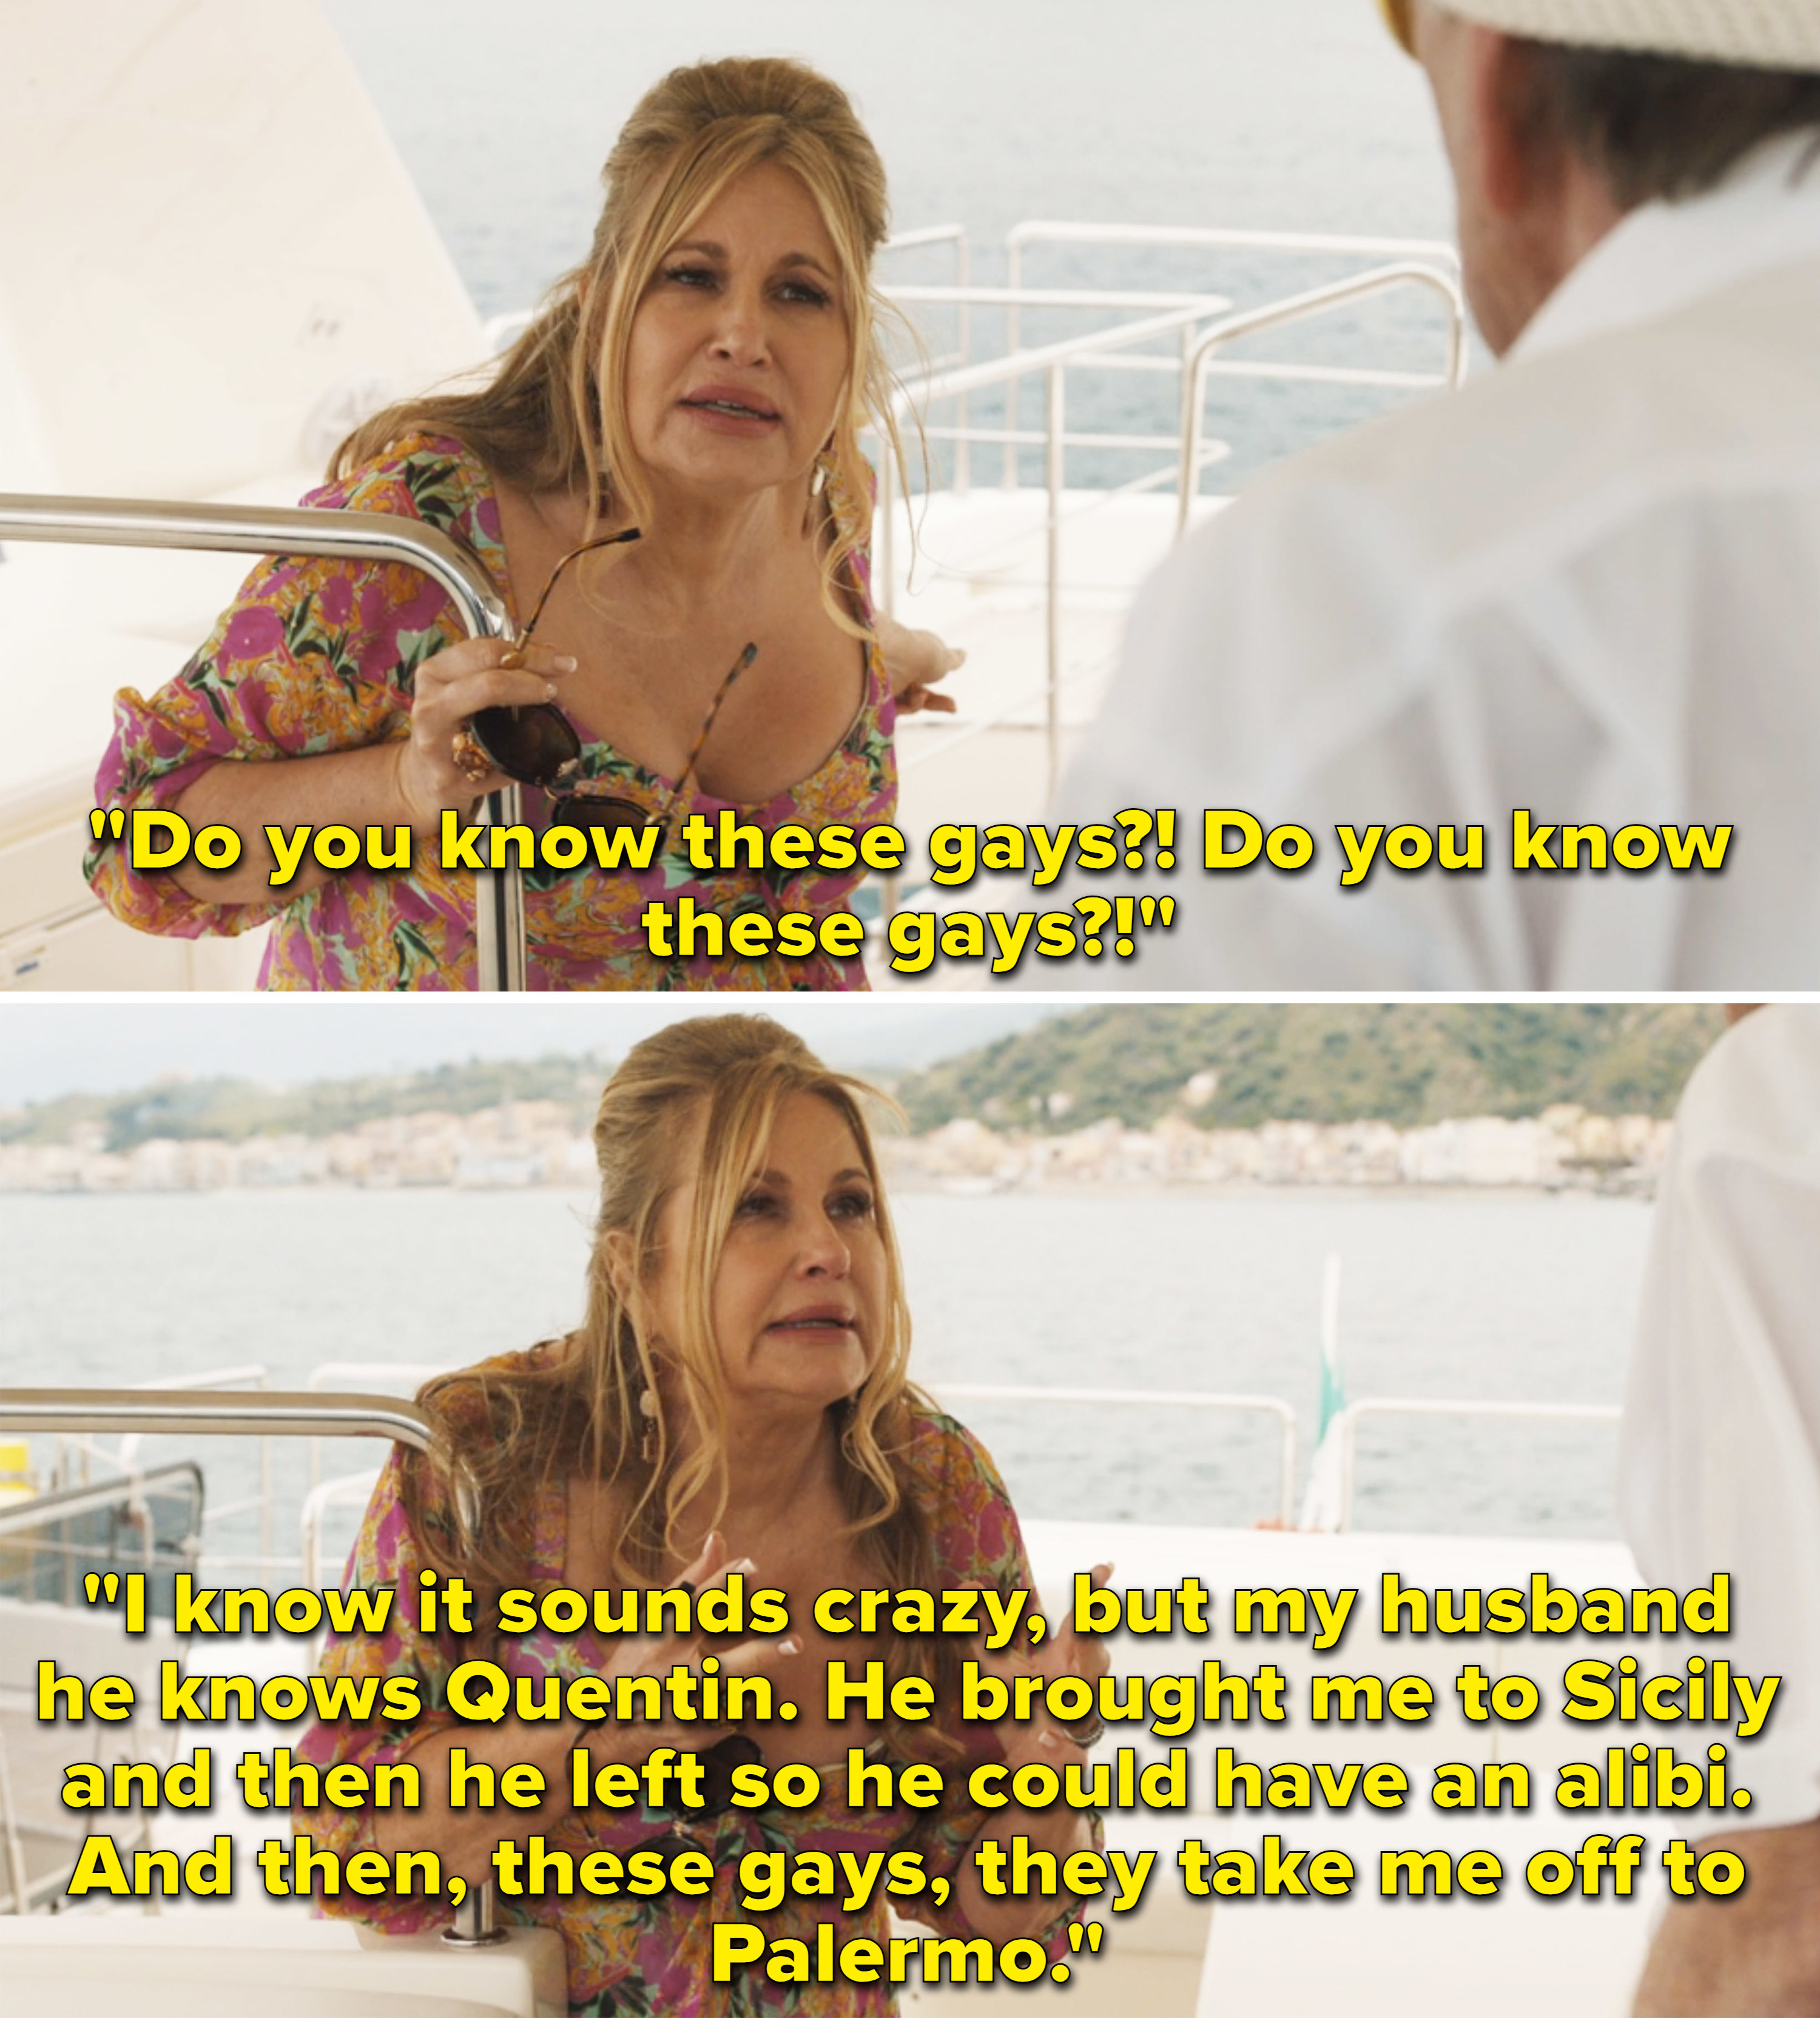 Tanya asking the yacht captain if he knew the gays. She says, &quot;I know it sounds crazy, but my husband he knows Quentin. He brought me to Siciliy and then he left so he could have an alibi. And then, these gays, they take me off to Palermo&quot;